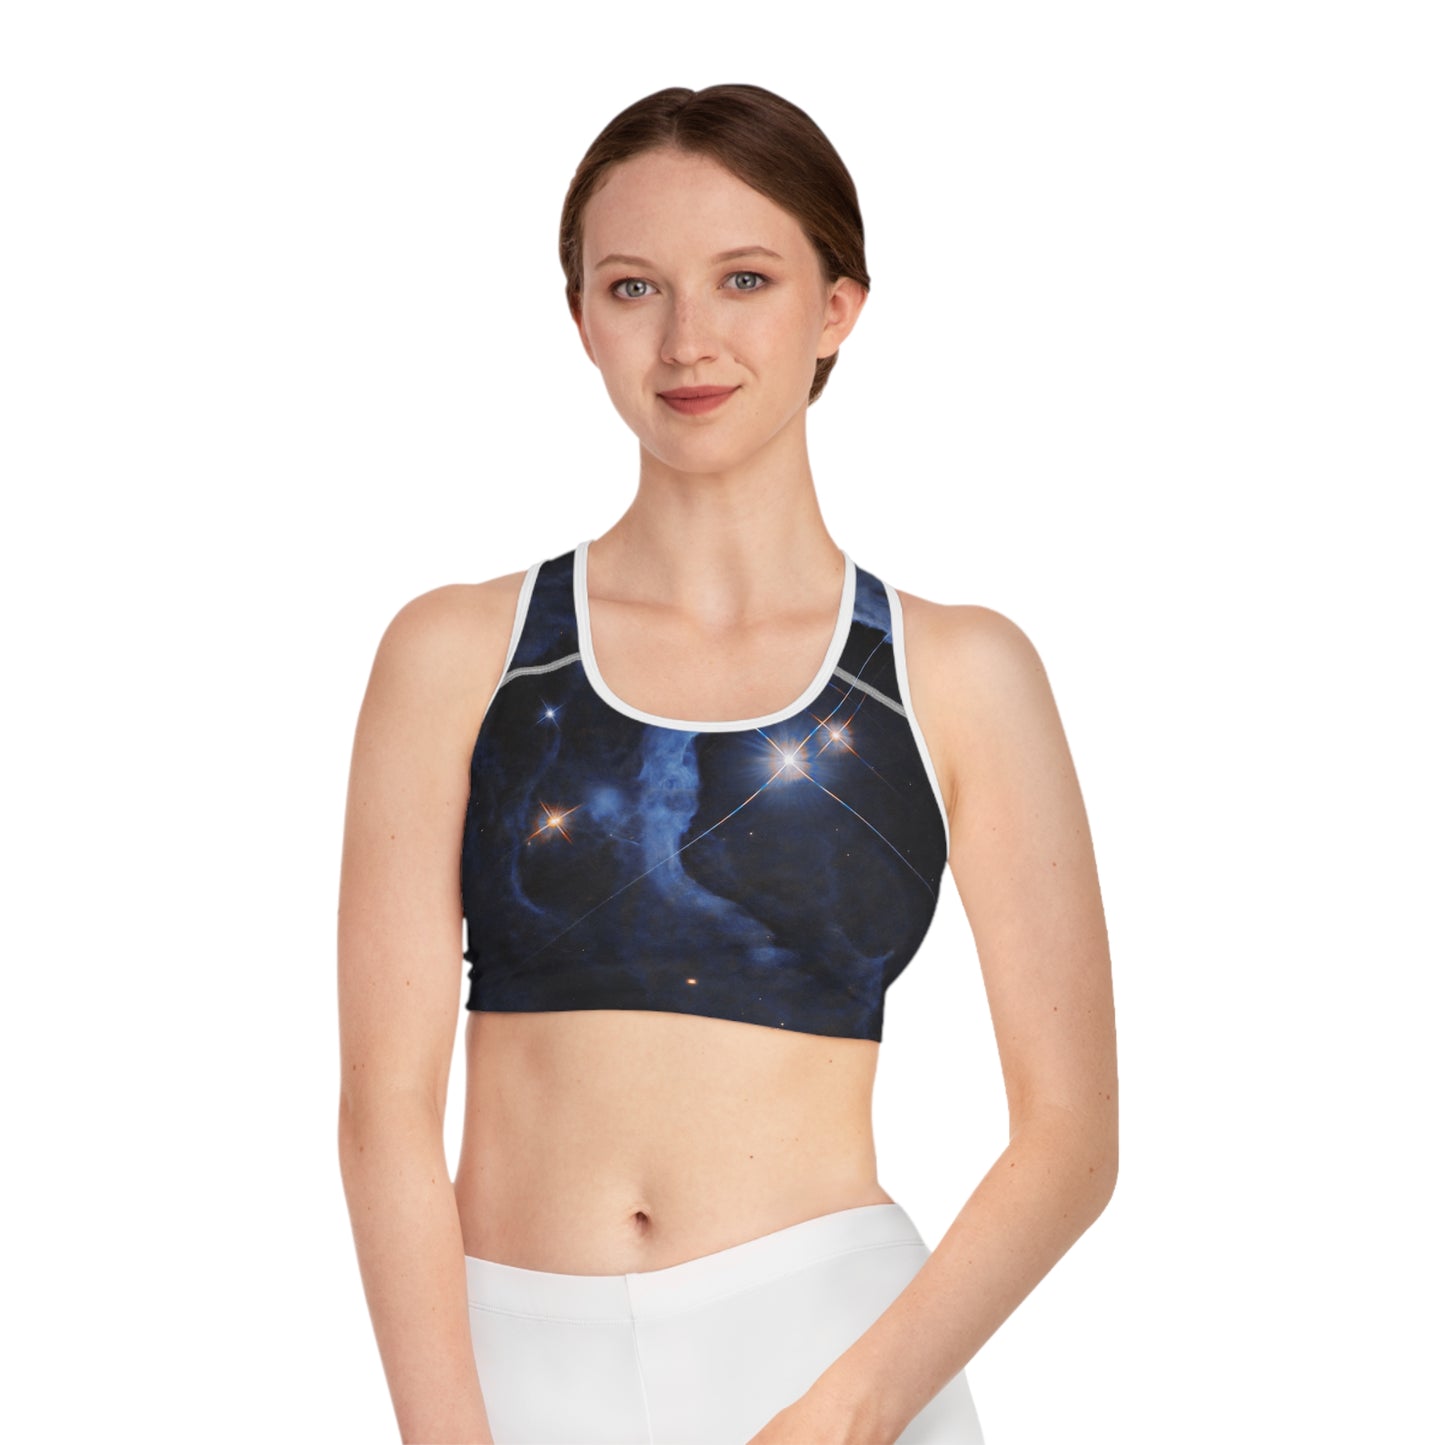 HP Tau, HP Tau G2, and G3 3 star system captured by Hubble - High Performance Sports Bra